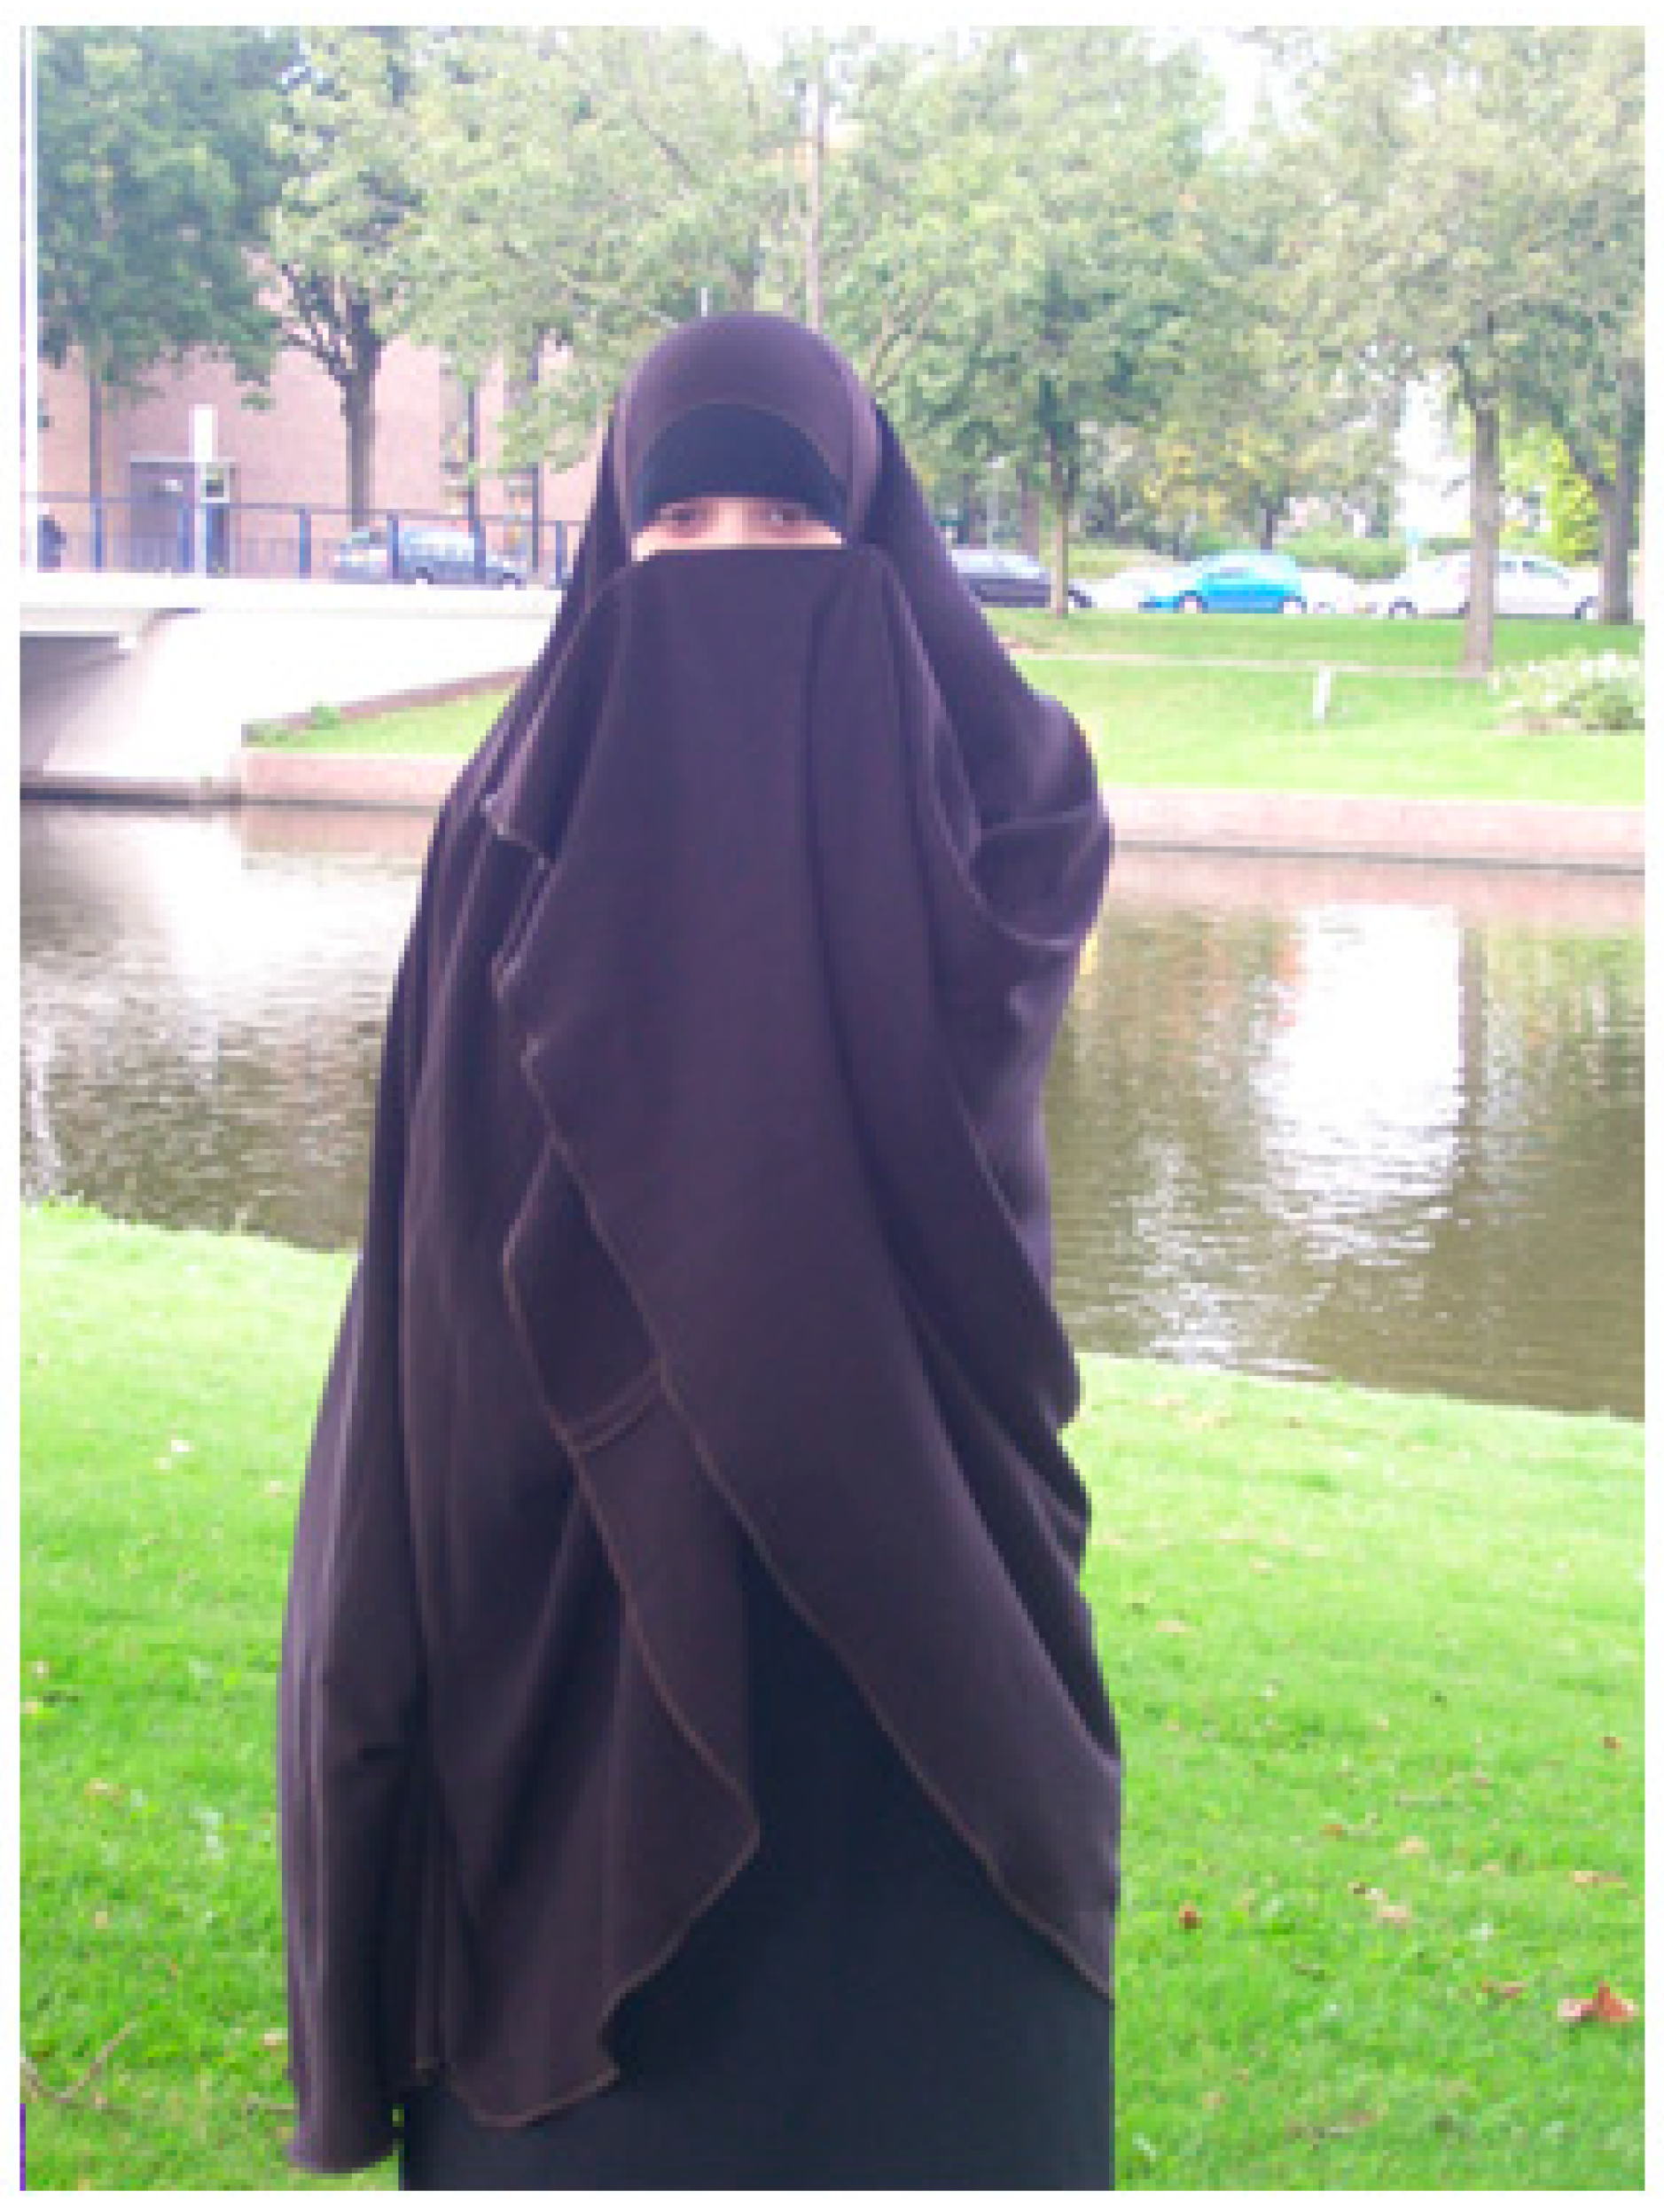 Religions | Free Full-Text | The Burka Ban: Islamic Dress, Freedom and  Choice in The Netherlands in Light of the 2019 Burka Ban Law